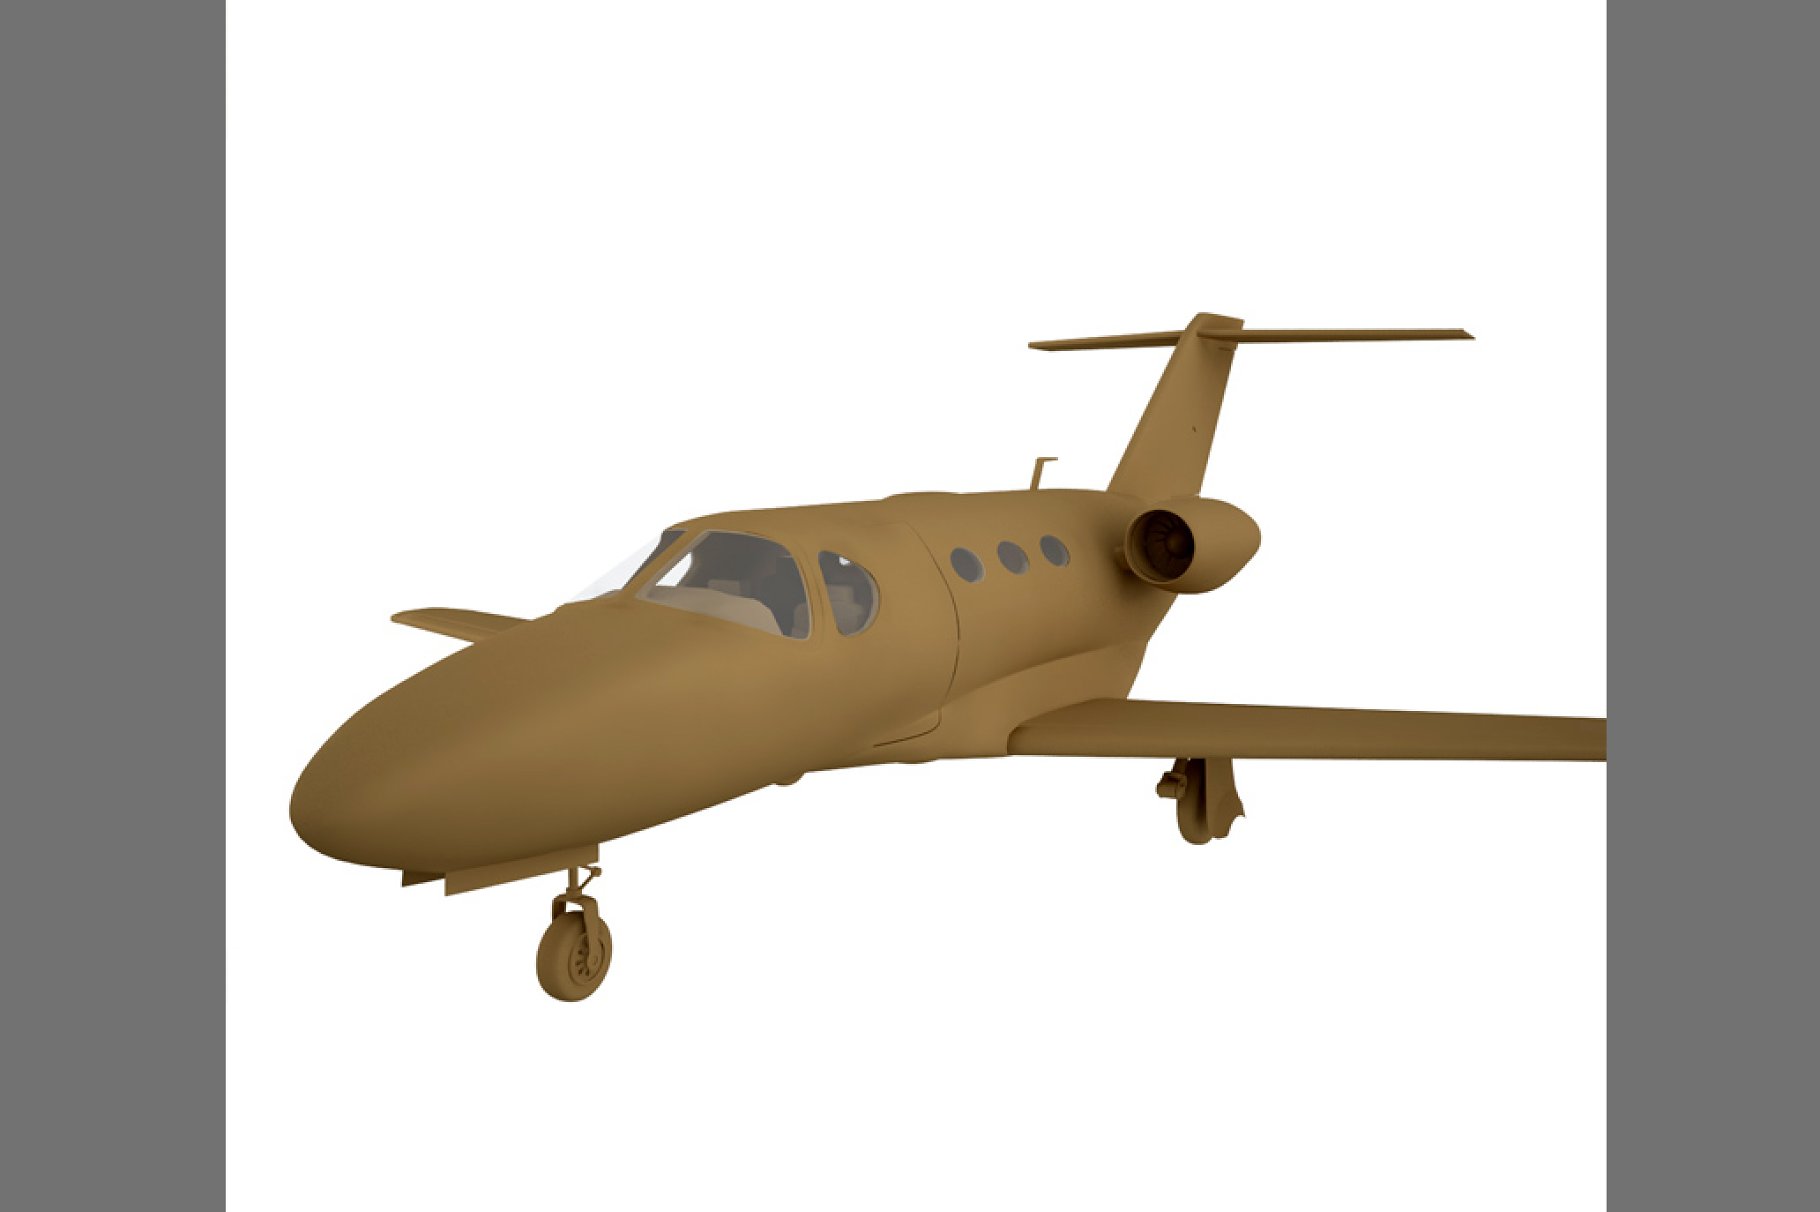 Cessna Mustang 510 Private Jet preview.